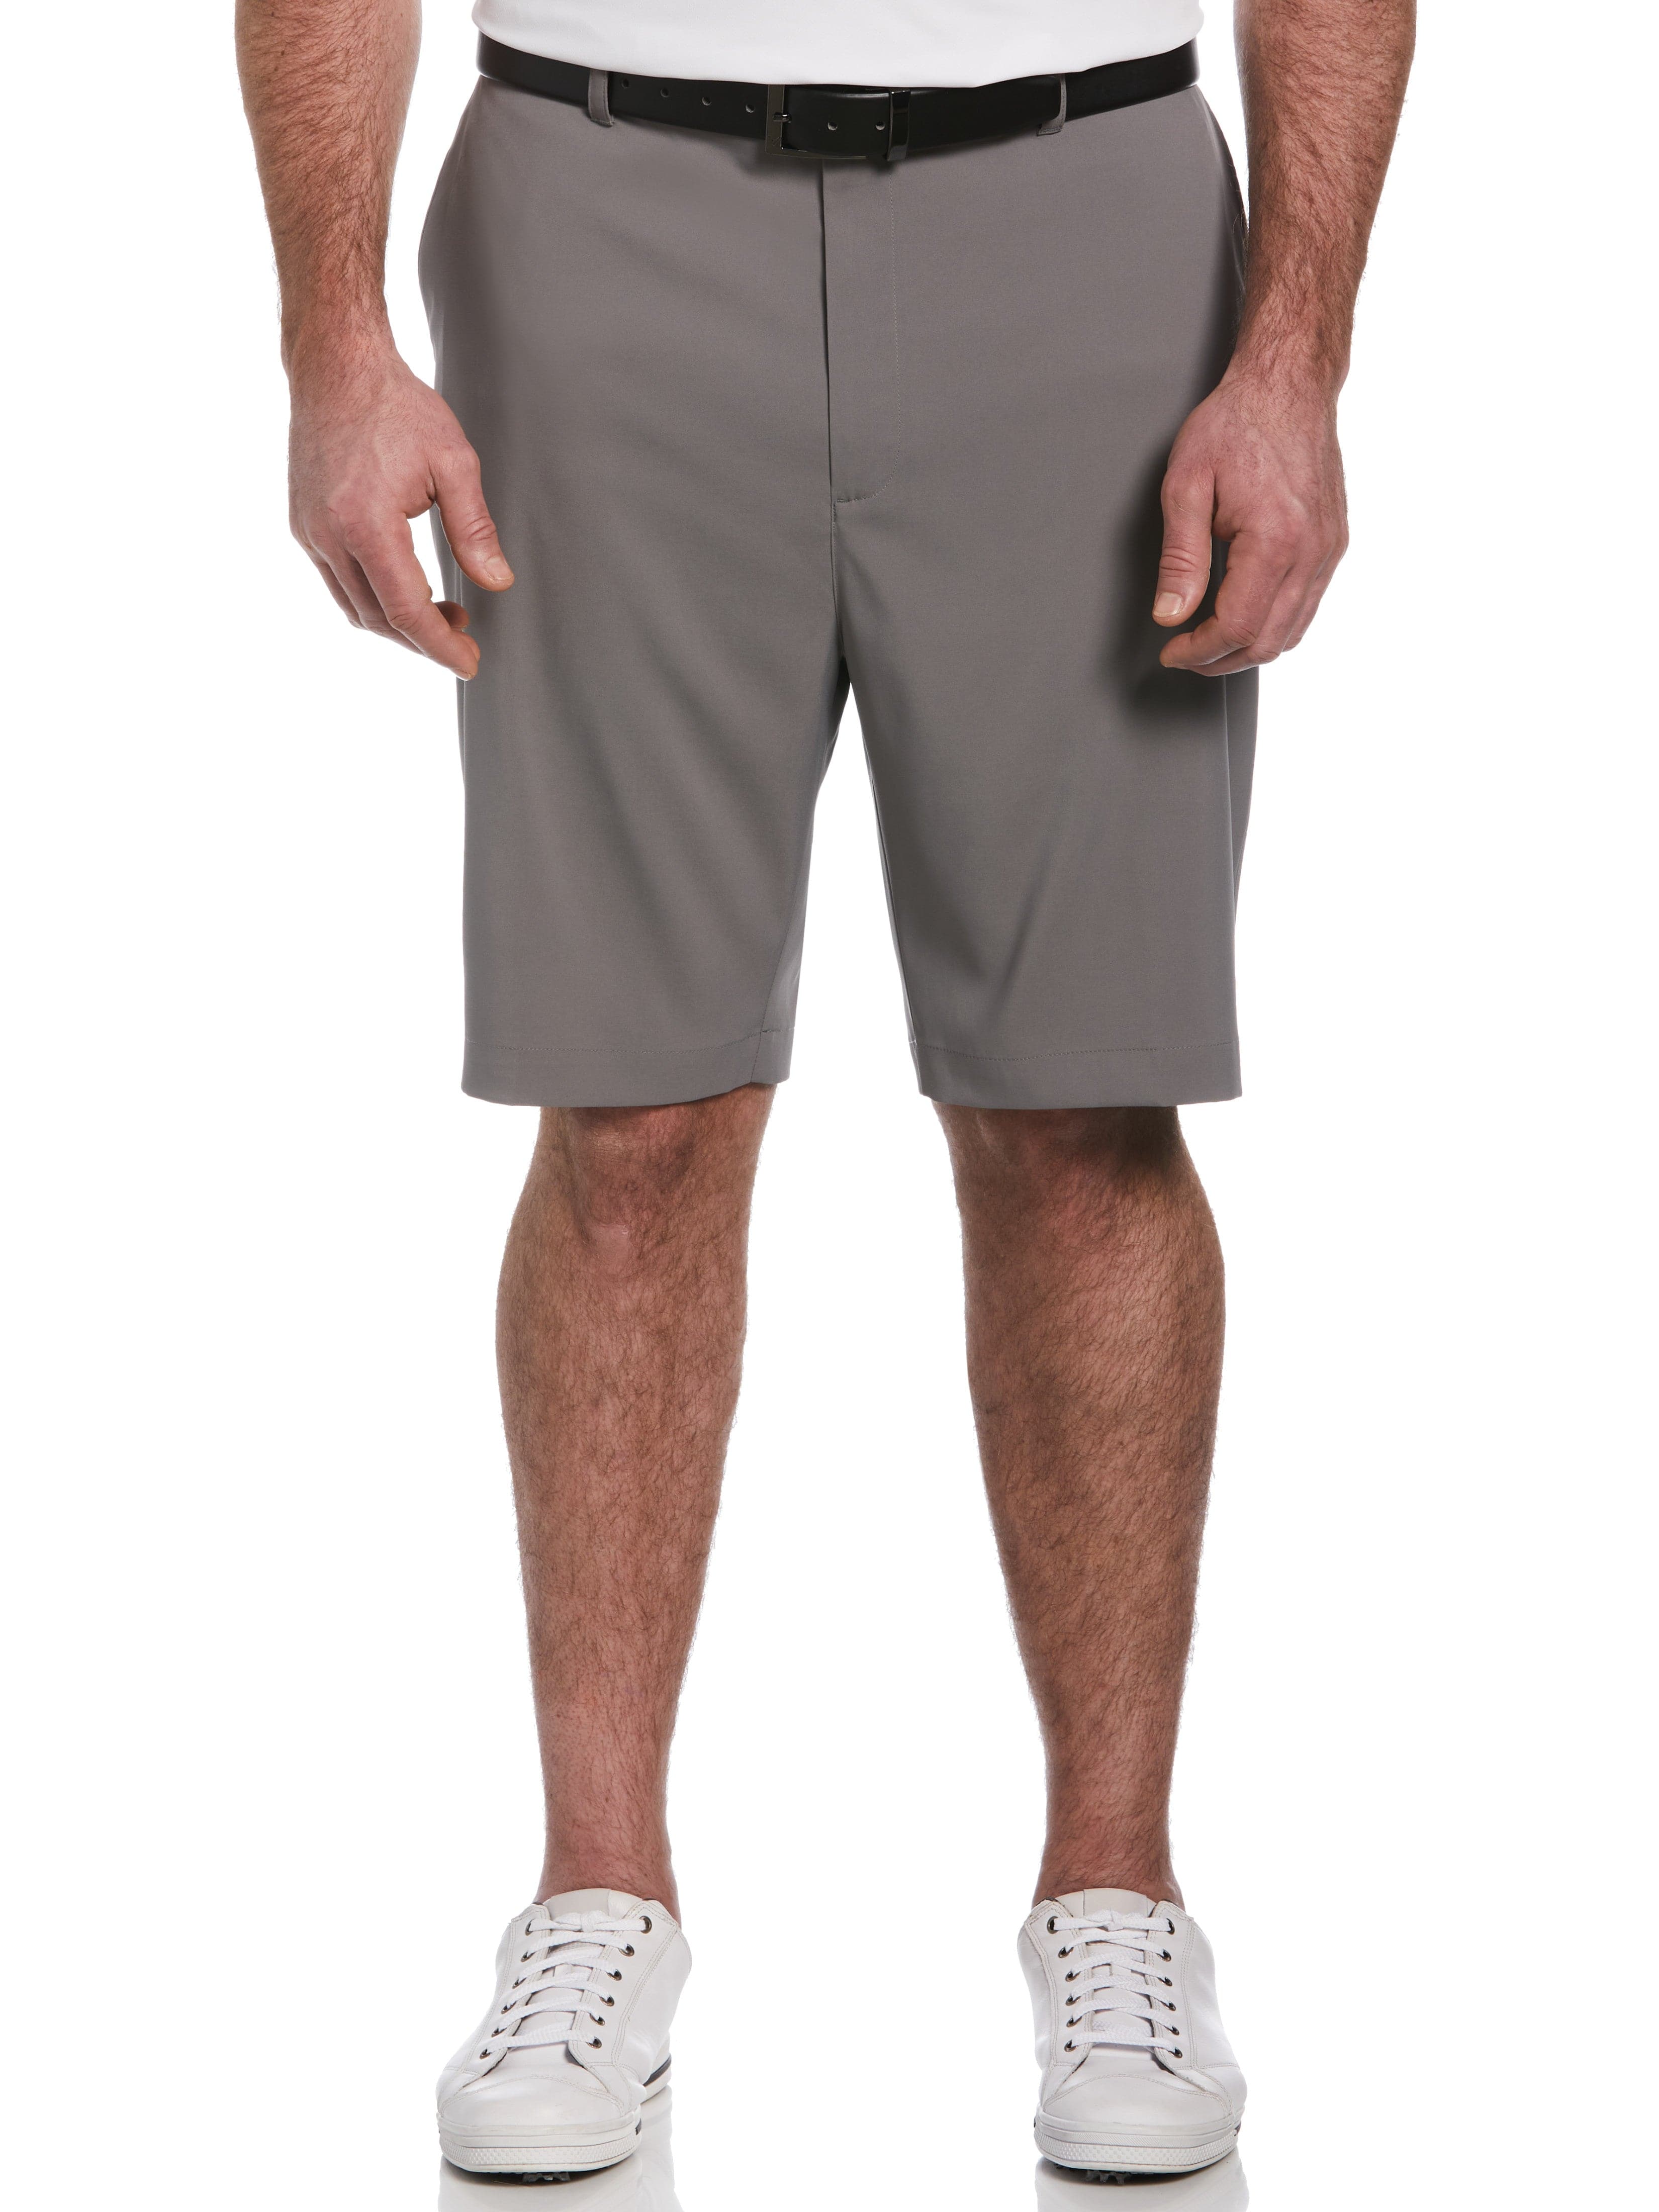 Mens Stretch Solid Golf Short with Active Waistband